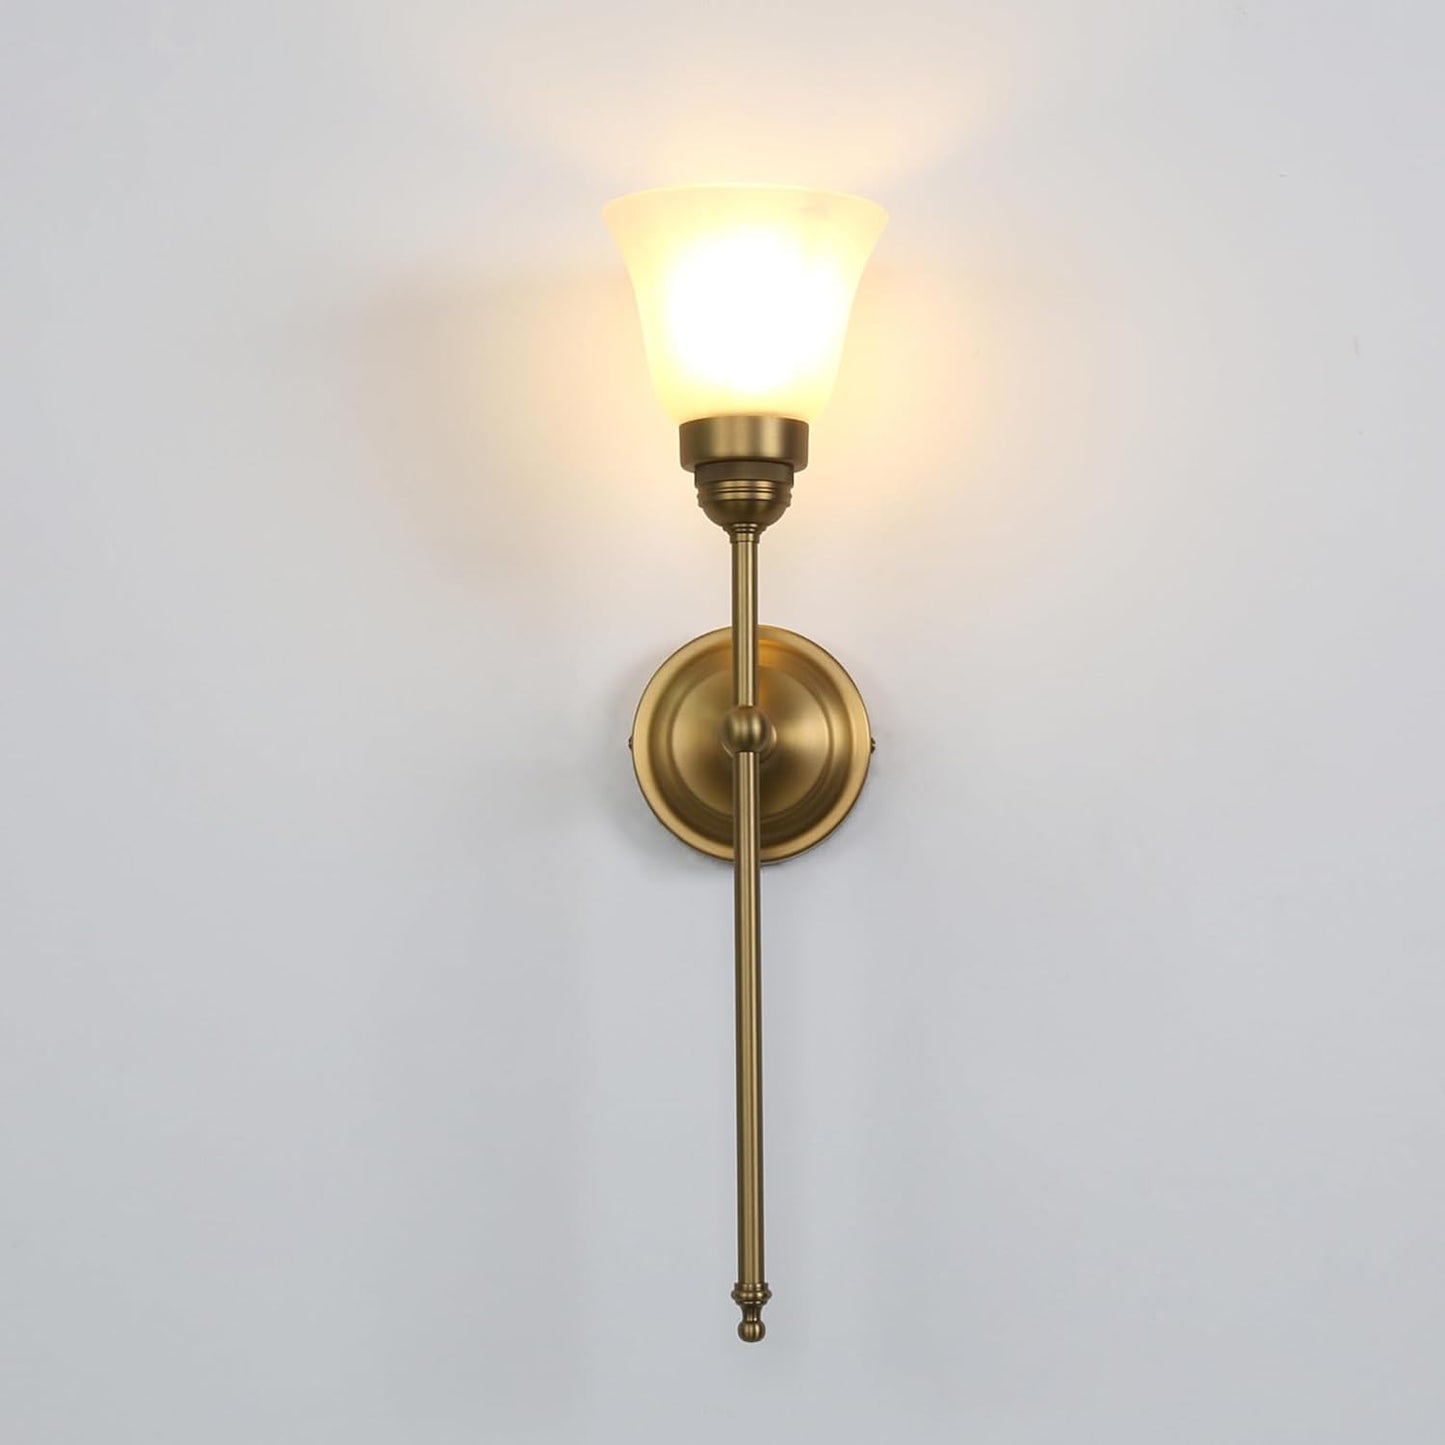 Set of 2 Vintage Wall Sconces, Classic Hardwired Wall Sconce Lamps